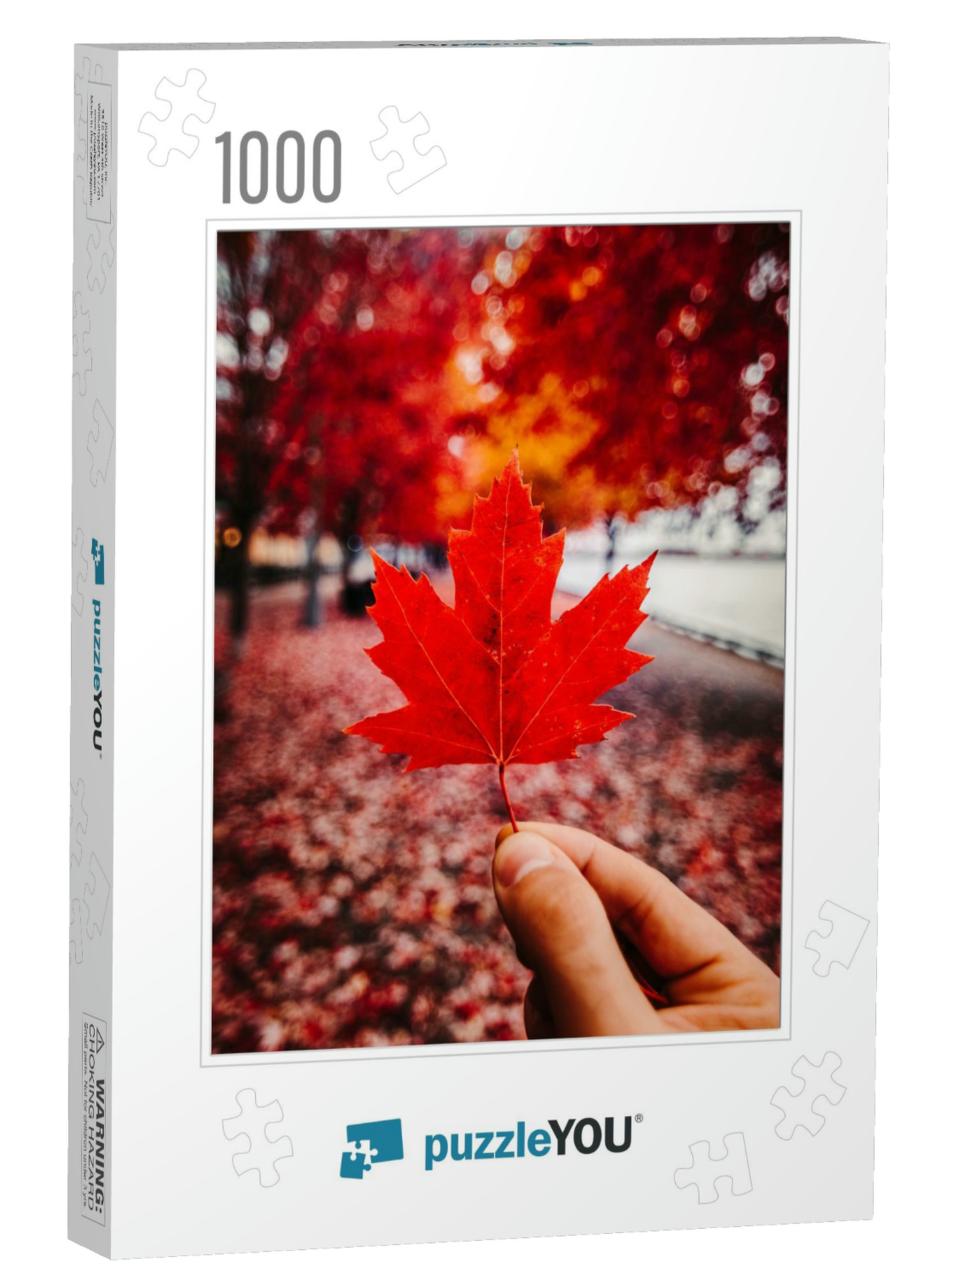 Red Canadian Maple Leaf in Fall/Autumn Setting - Red Leaf... Jigsaw Puzzle with 1000 pieces